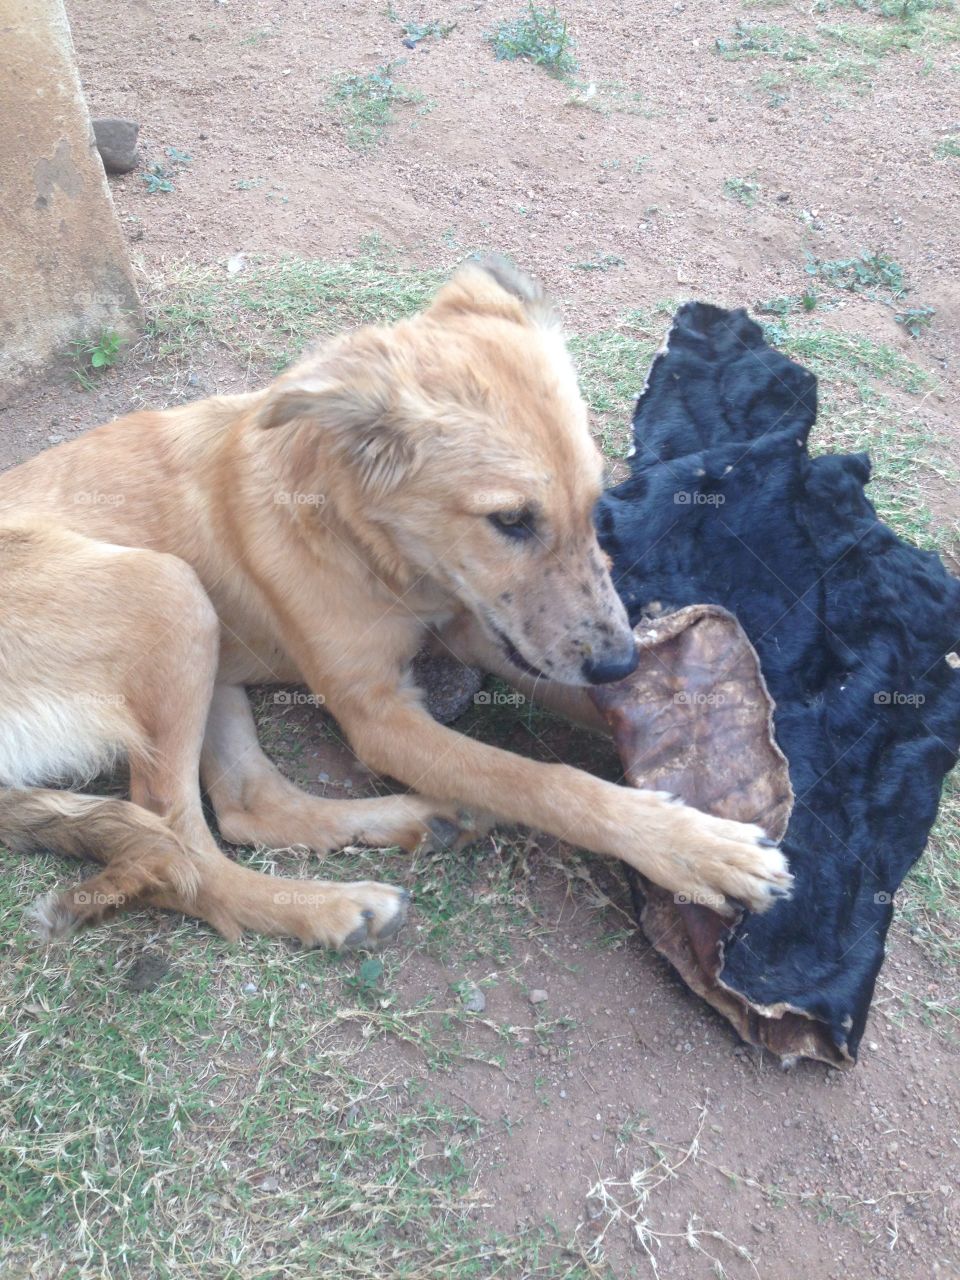 Pompi chewing on a cowhide